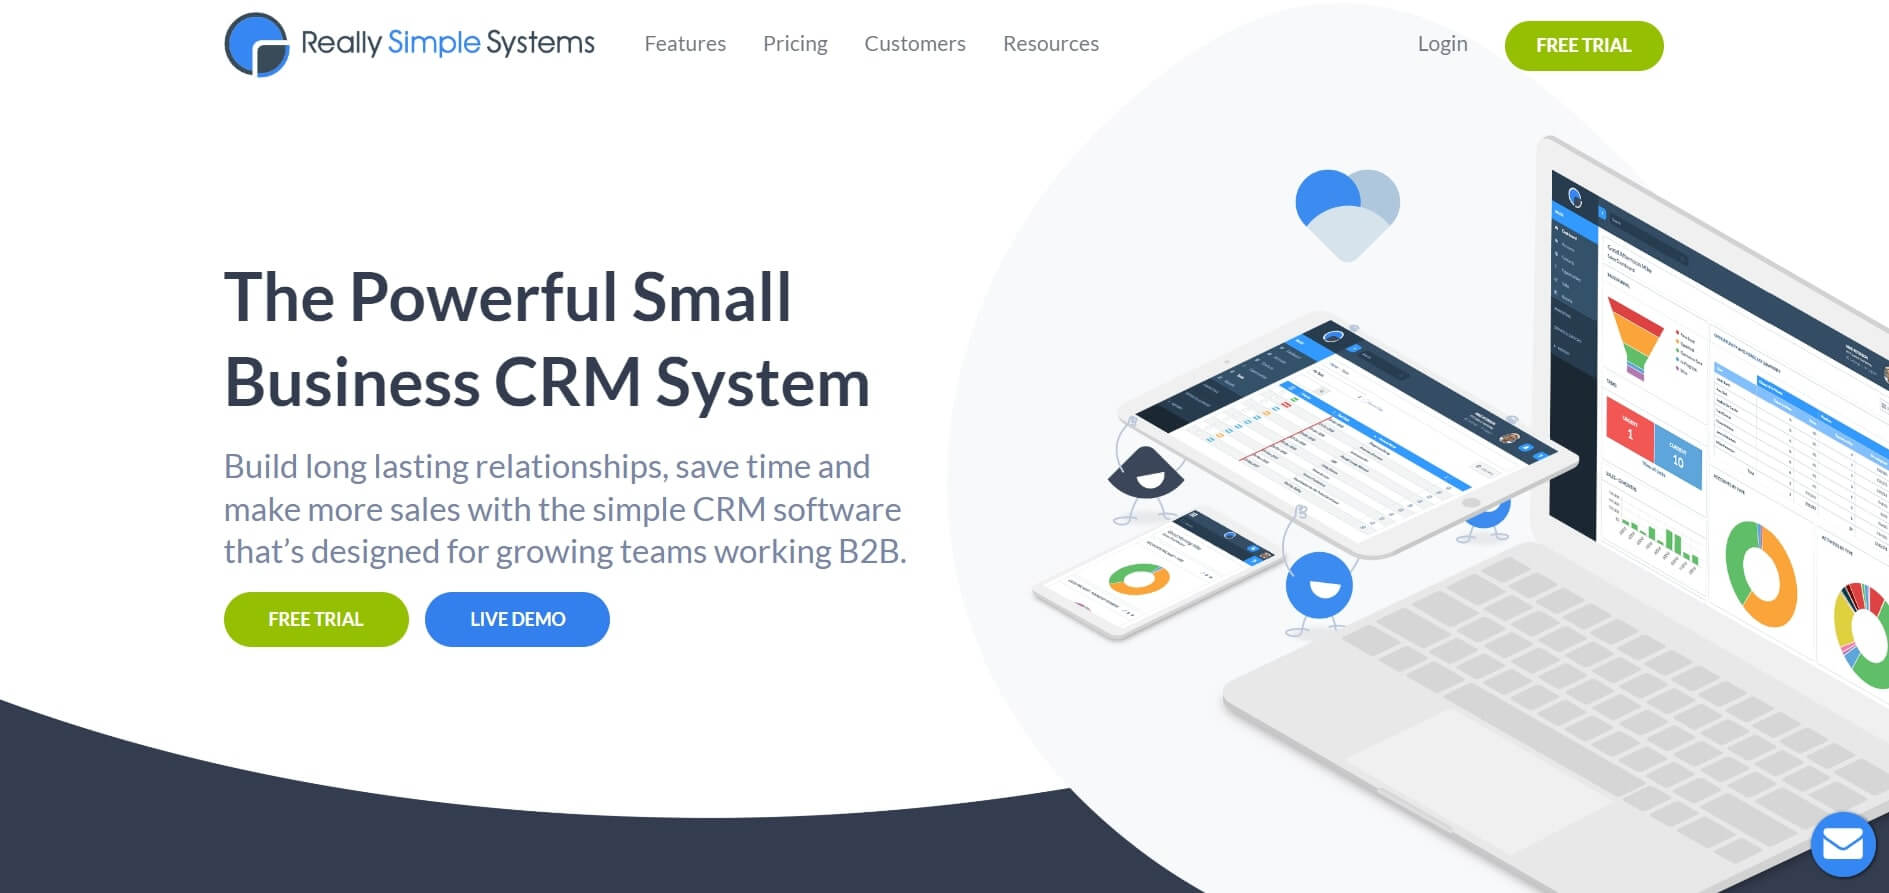 really simple systems crm